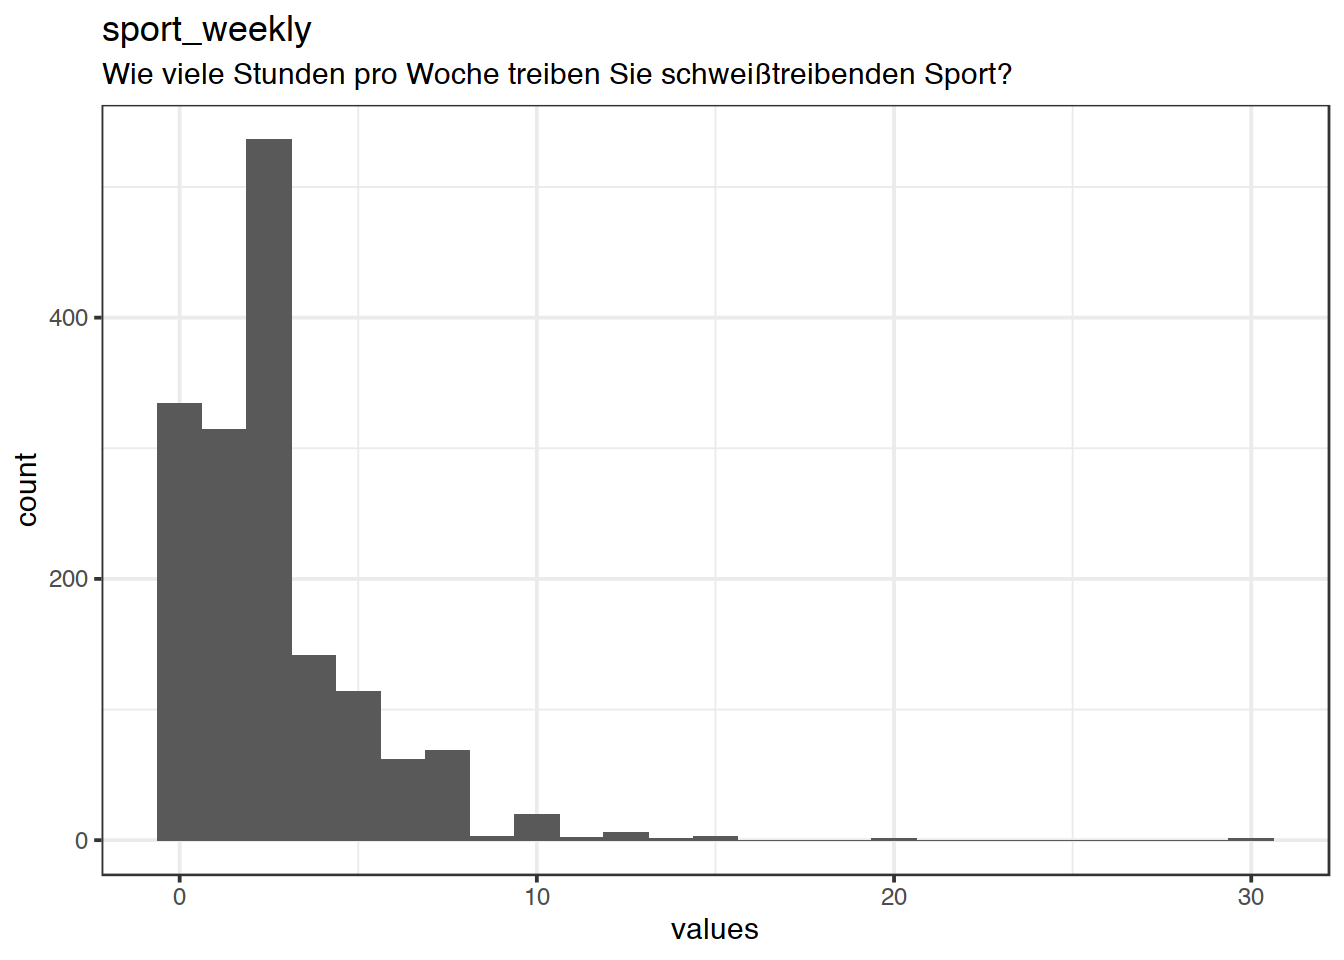 Distribution of values for sport_weekly